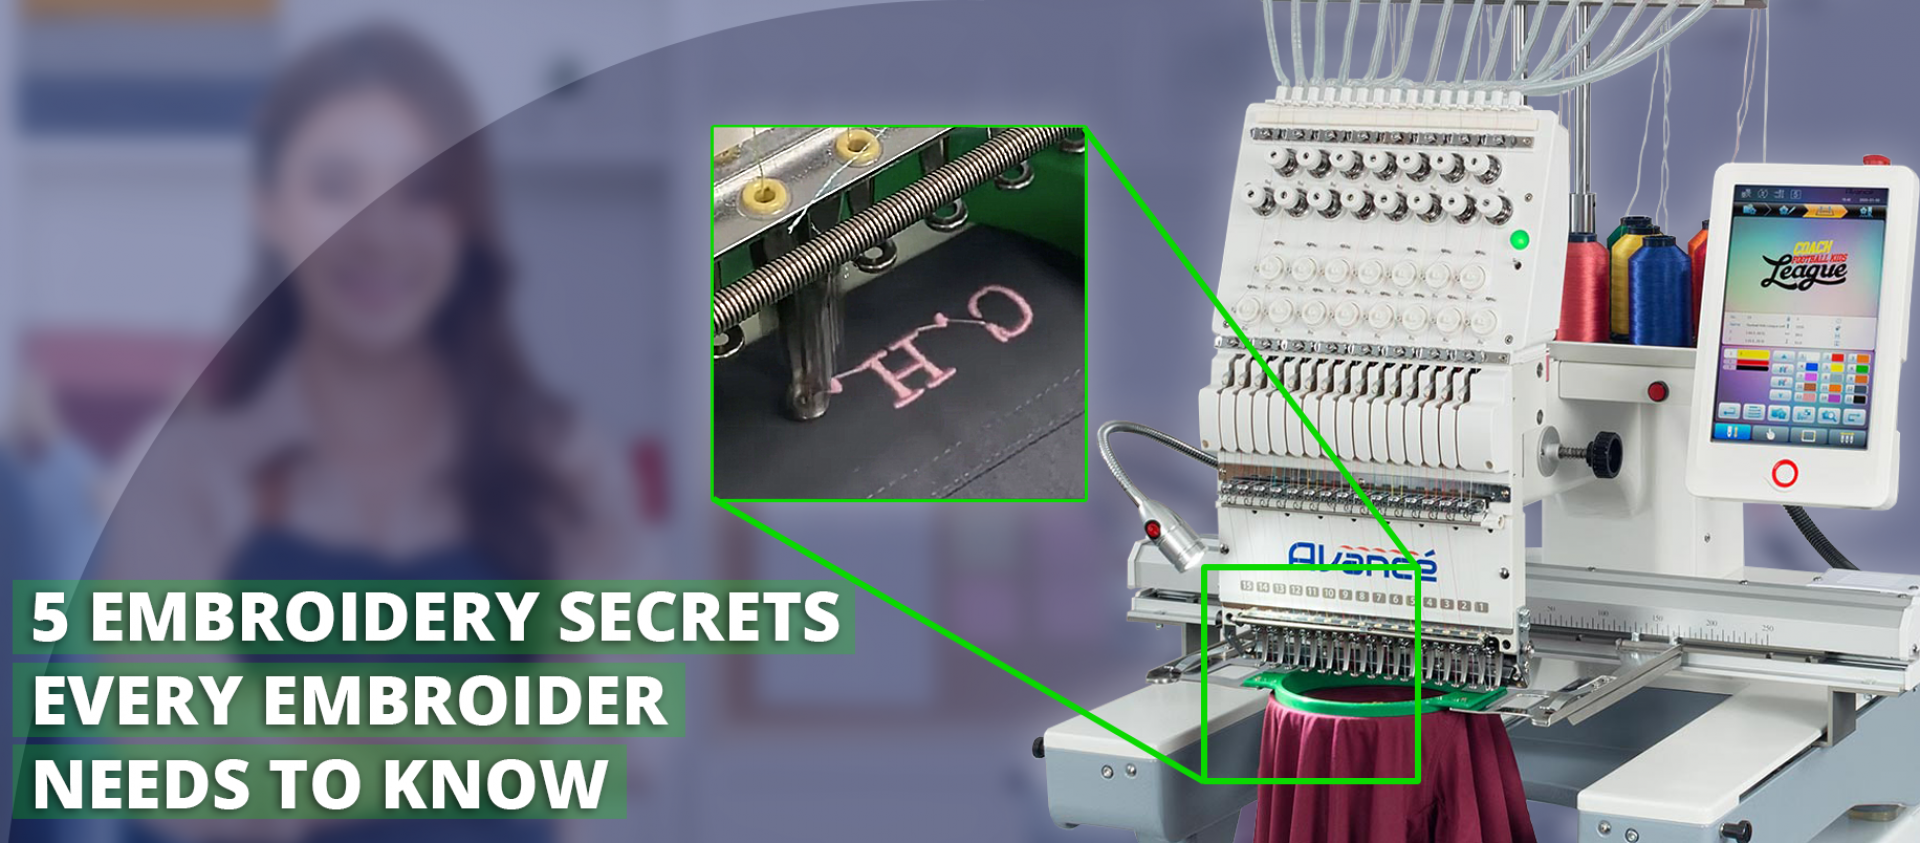 5 Embroidery Secrets Every Embroider Needs to Know